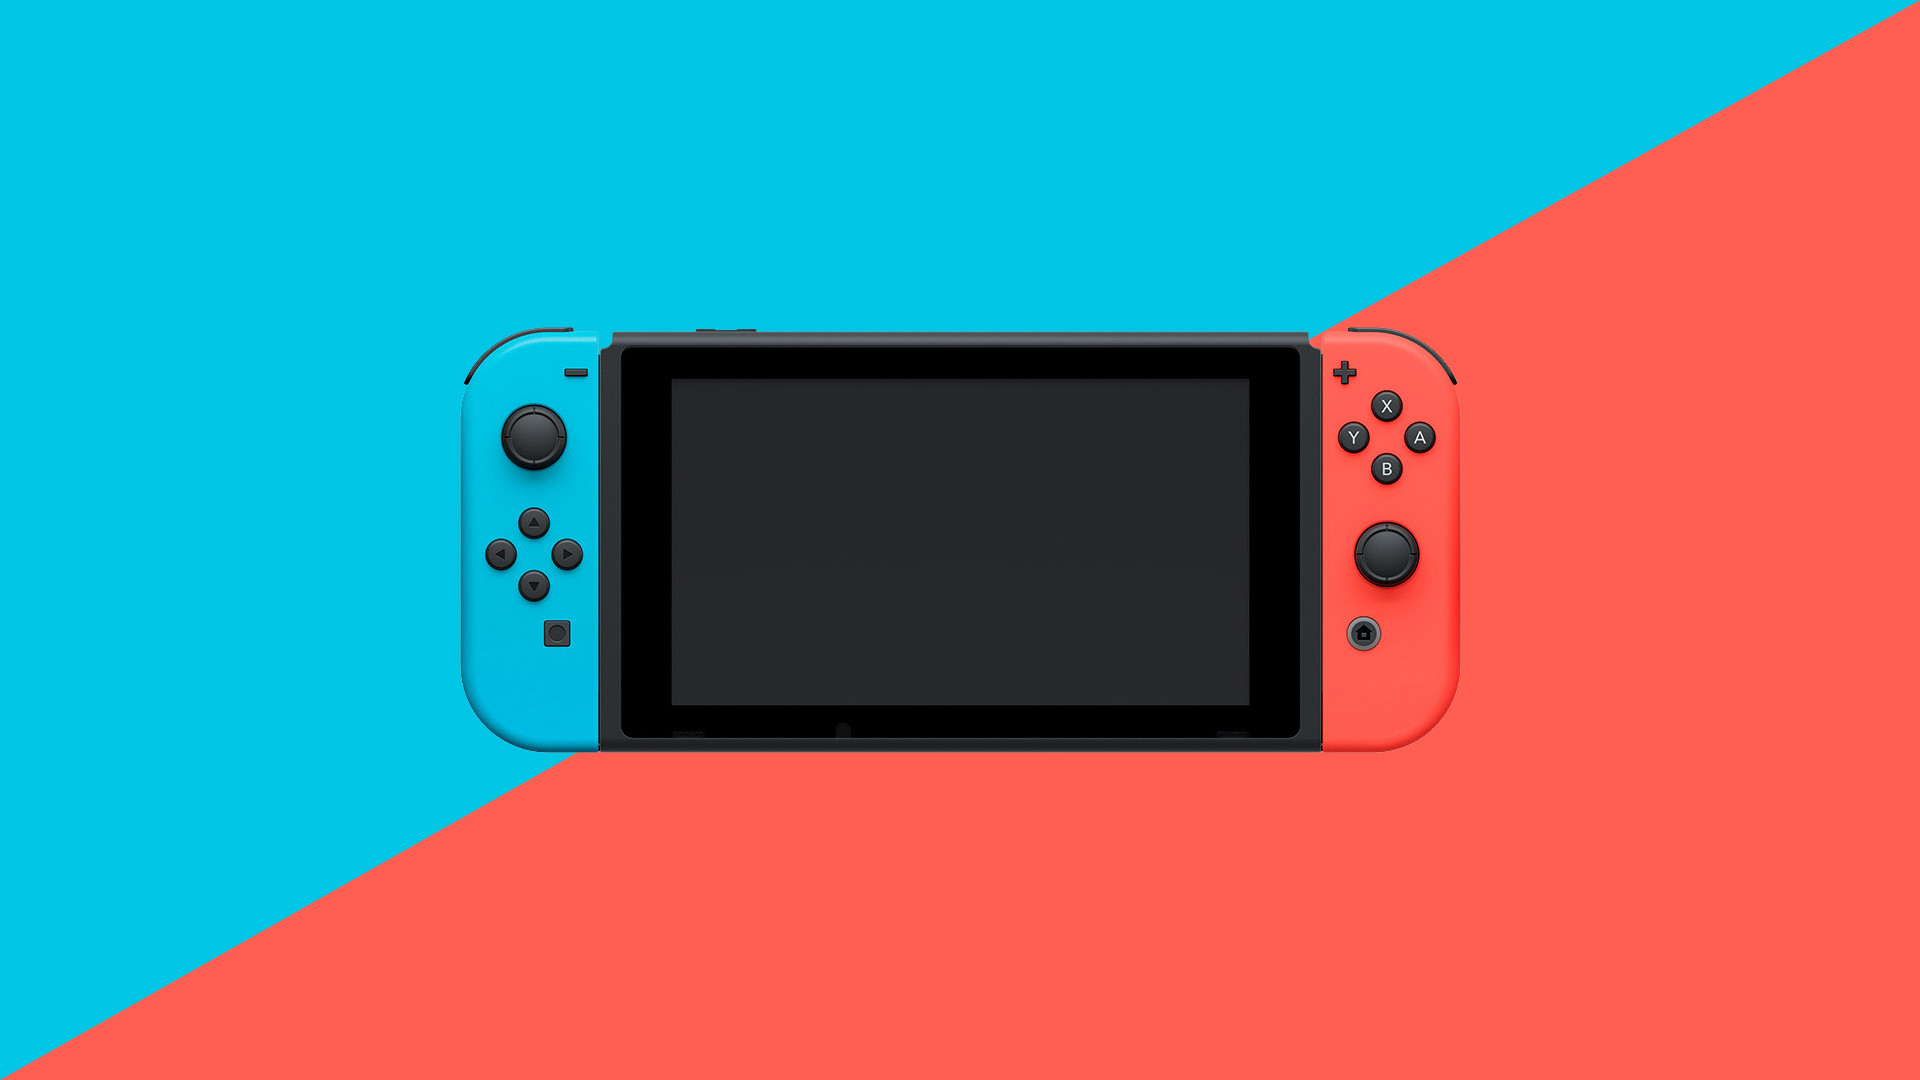 Some Selfmade Nintendo Switch Backgrounds For Computer 19 1080 And Mobile 1080 19 Need